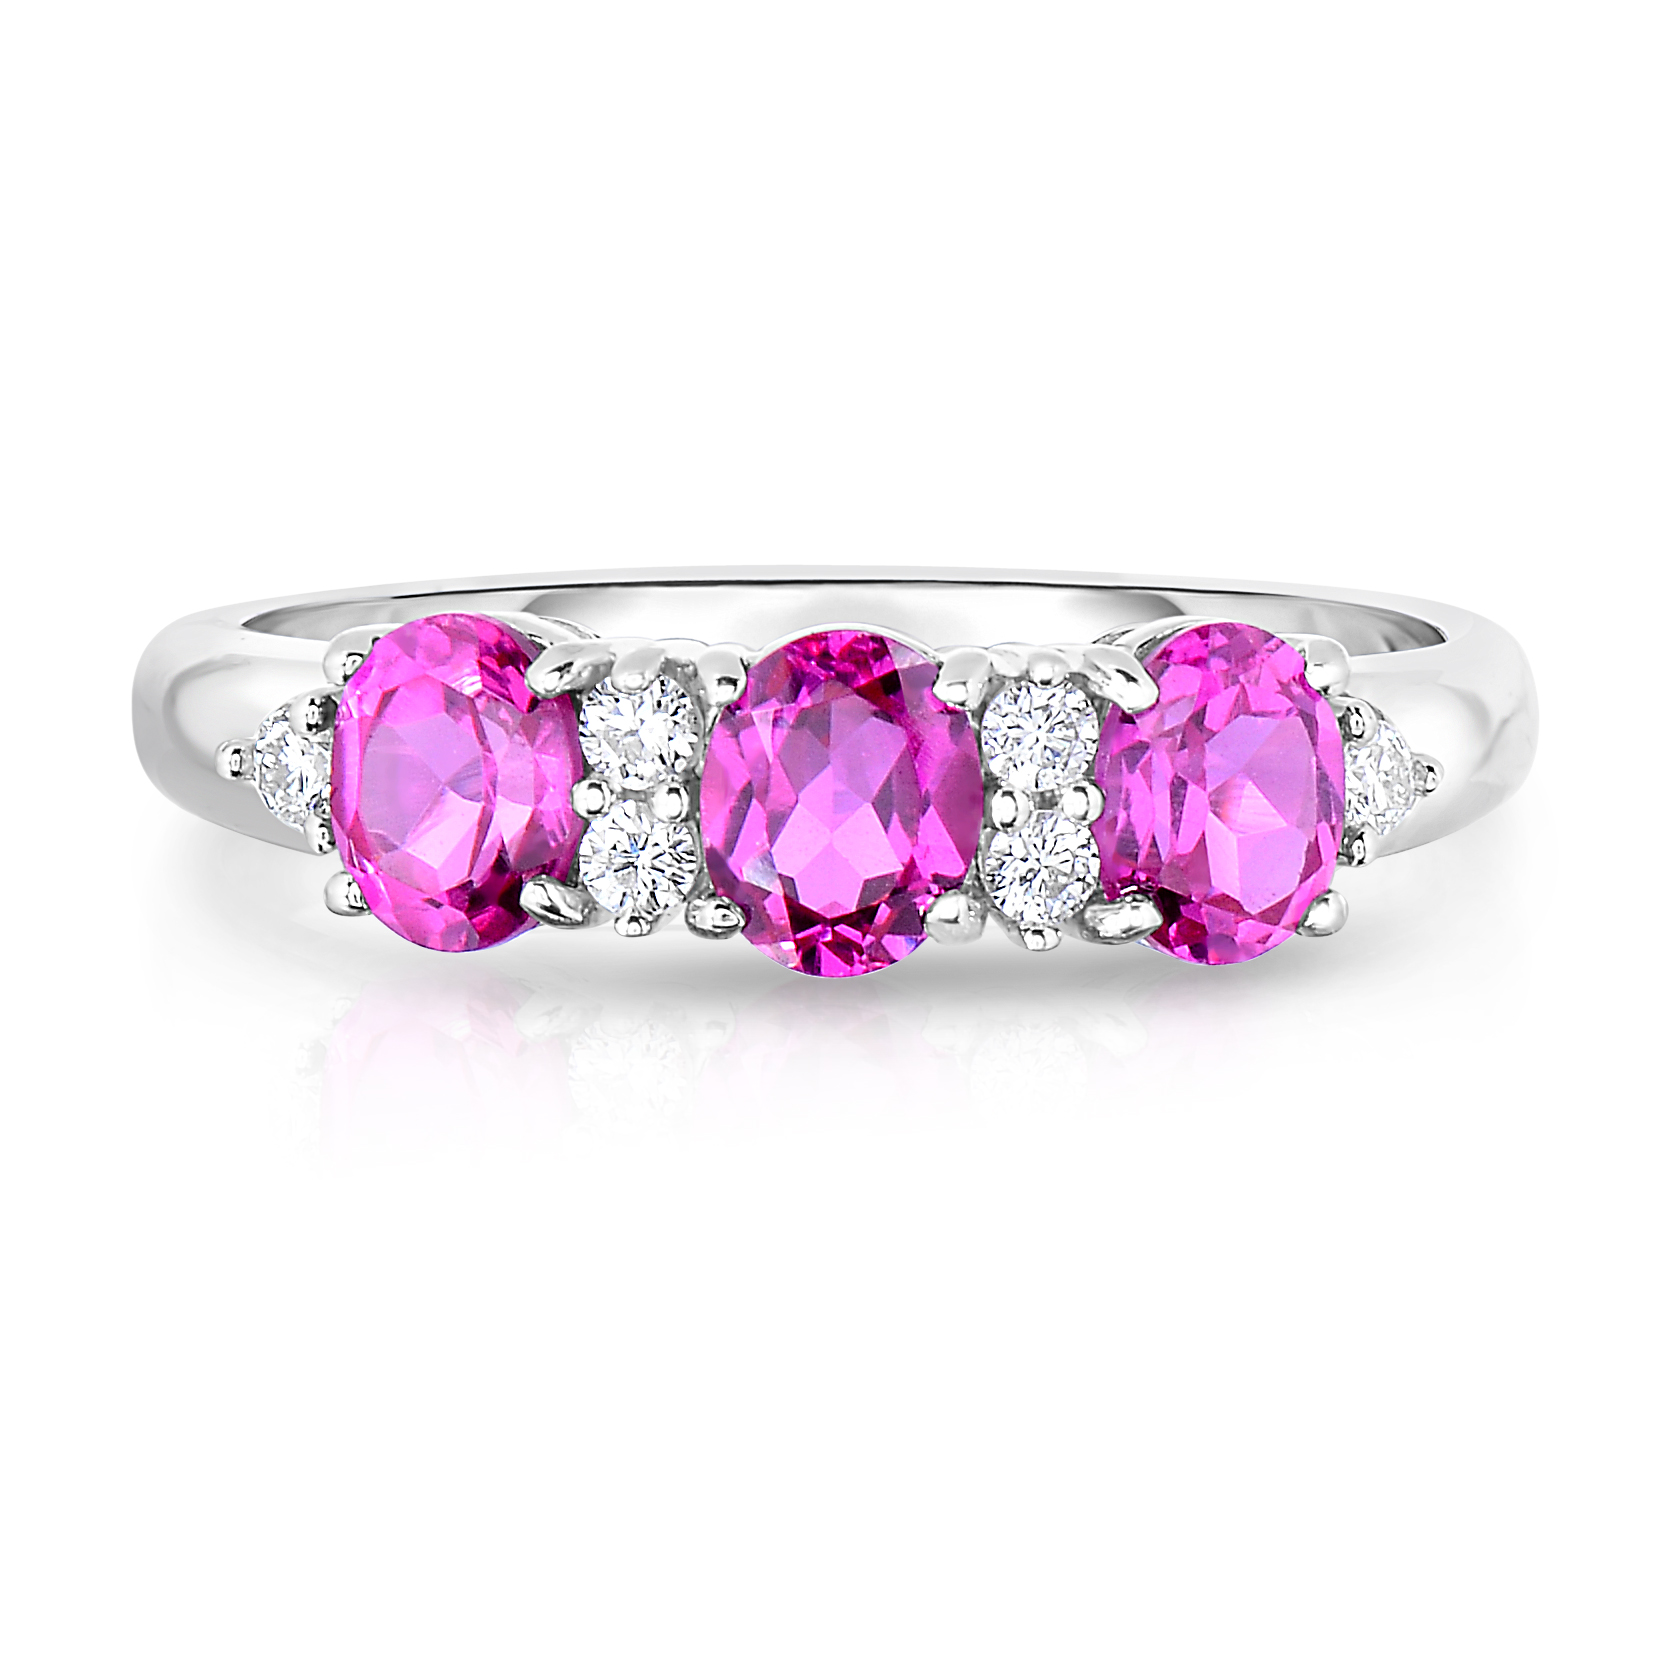 Sterling Silver Diamond & Pink Sapphire Ring - Size 7